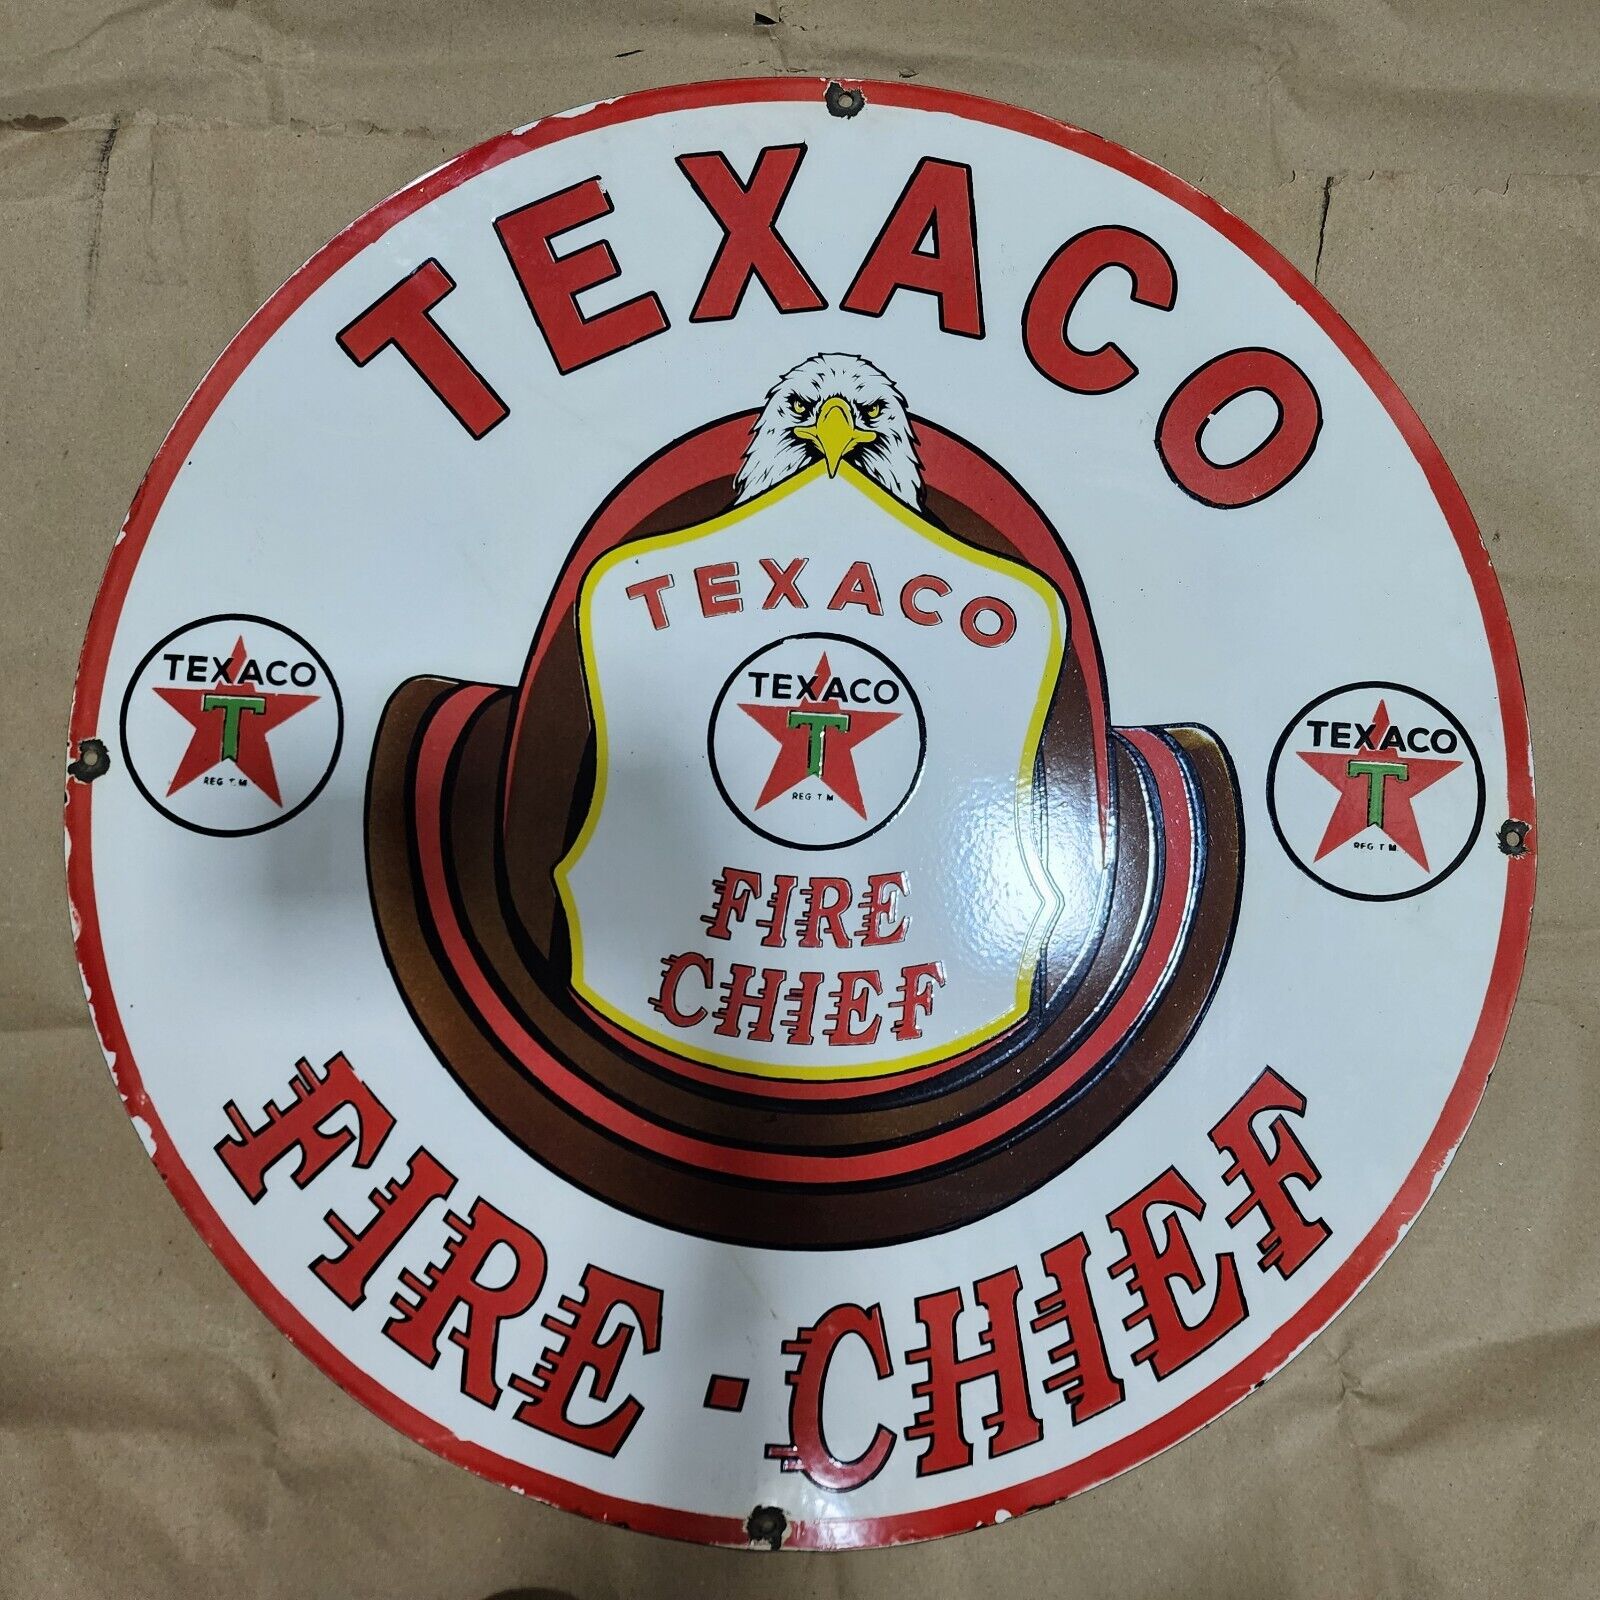 TEXACO FIRE-CHIEF PORCELAIN ENAMEL SIGN 30 INCHES ROUND